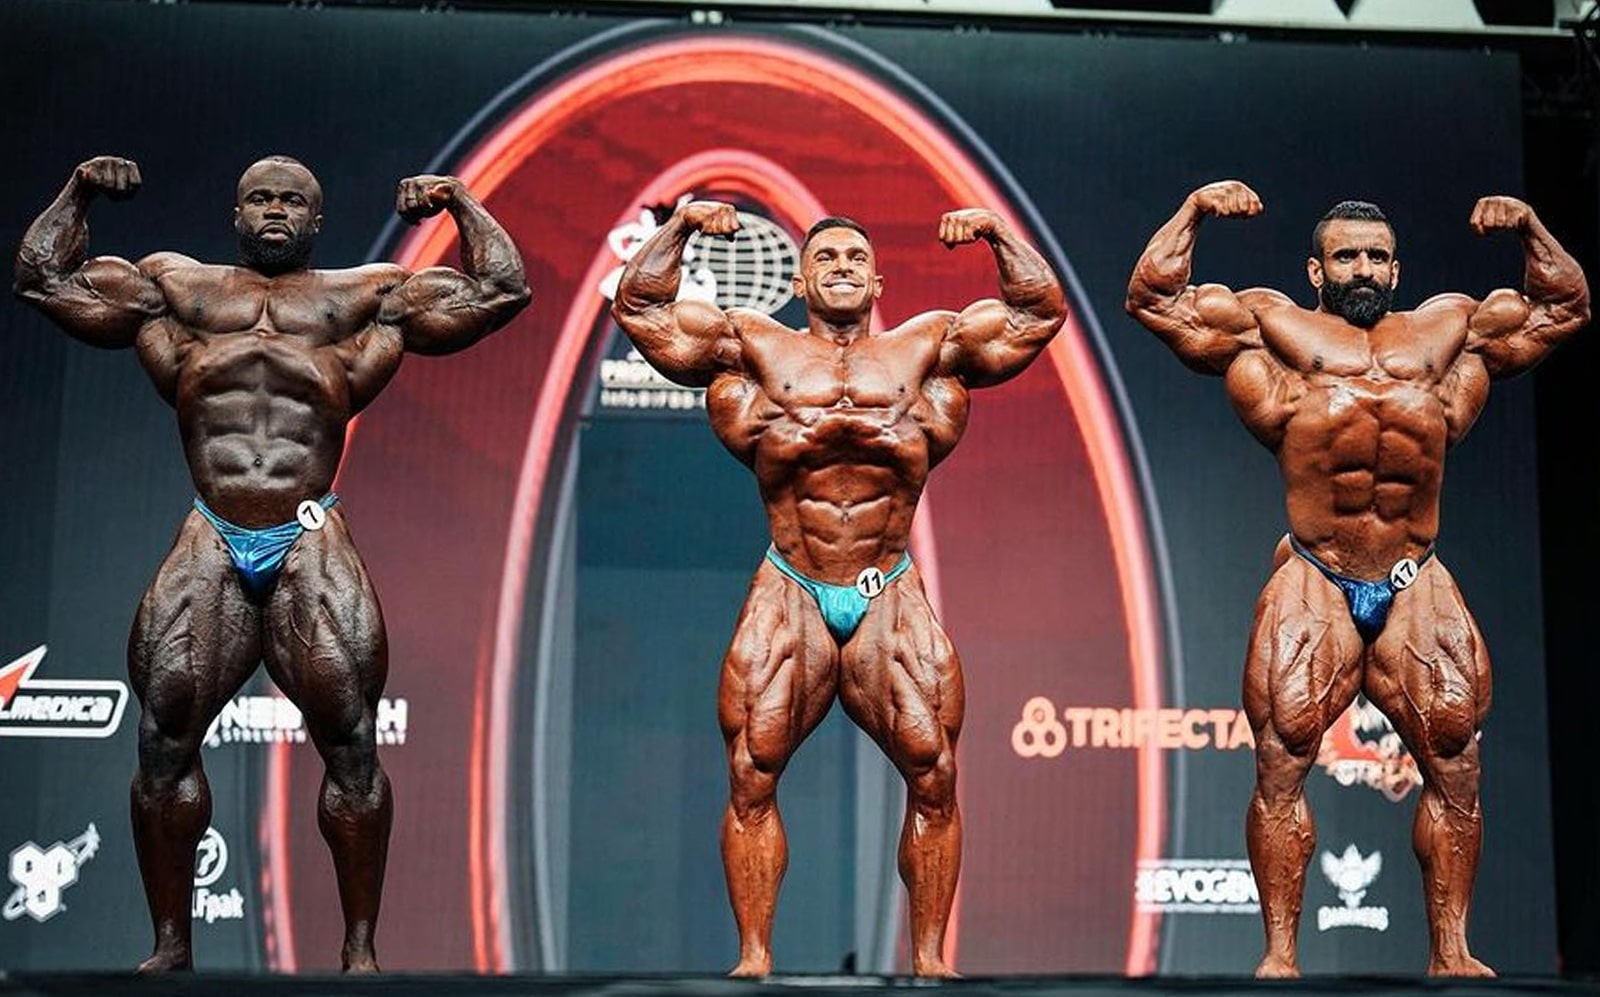 Mr. Olympia 2023 Classic Physique Pre-Judging Results Are Out And